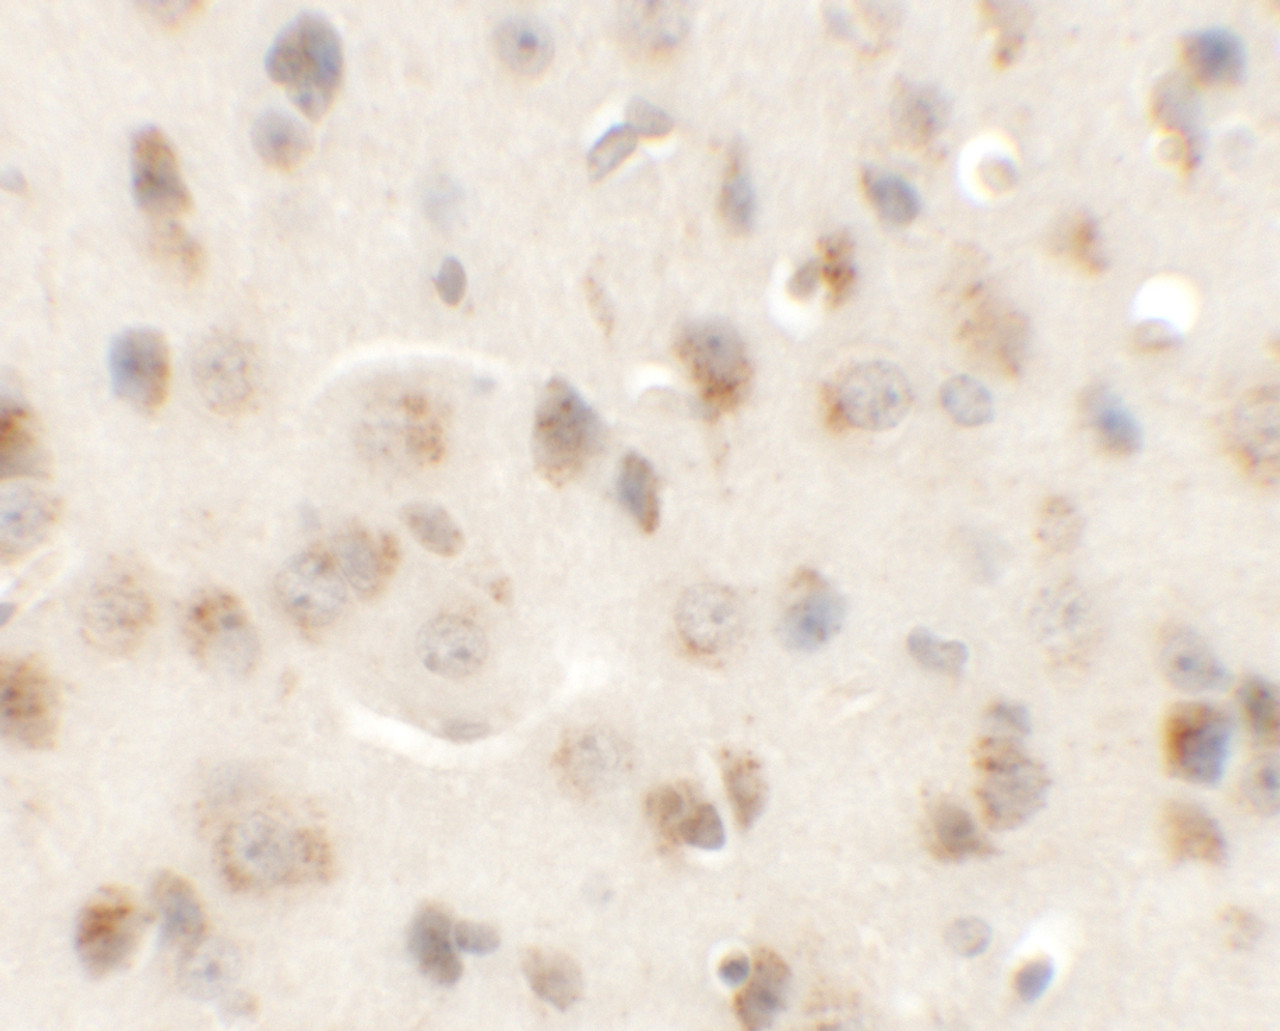 Immunohistochemistry of AP3M1 in mouse brain tissue with AP3M1 antibody at 5 ug/mL.